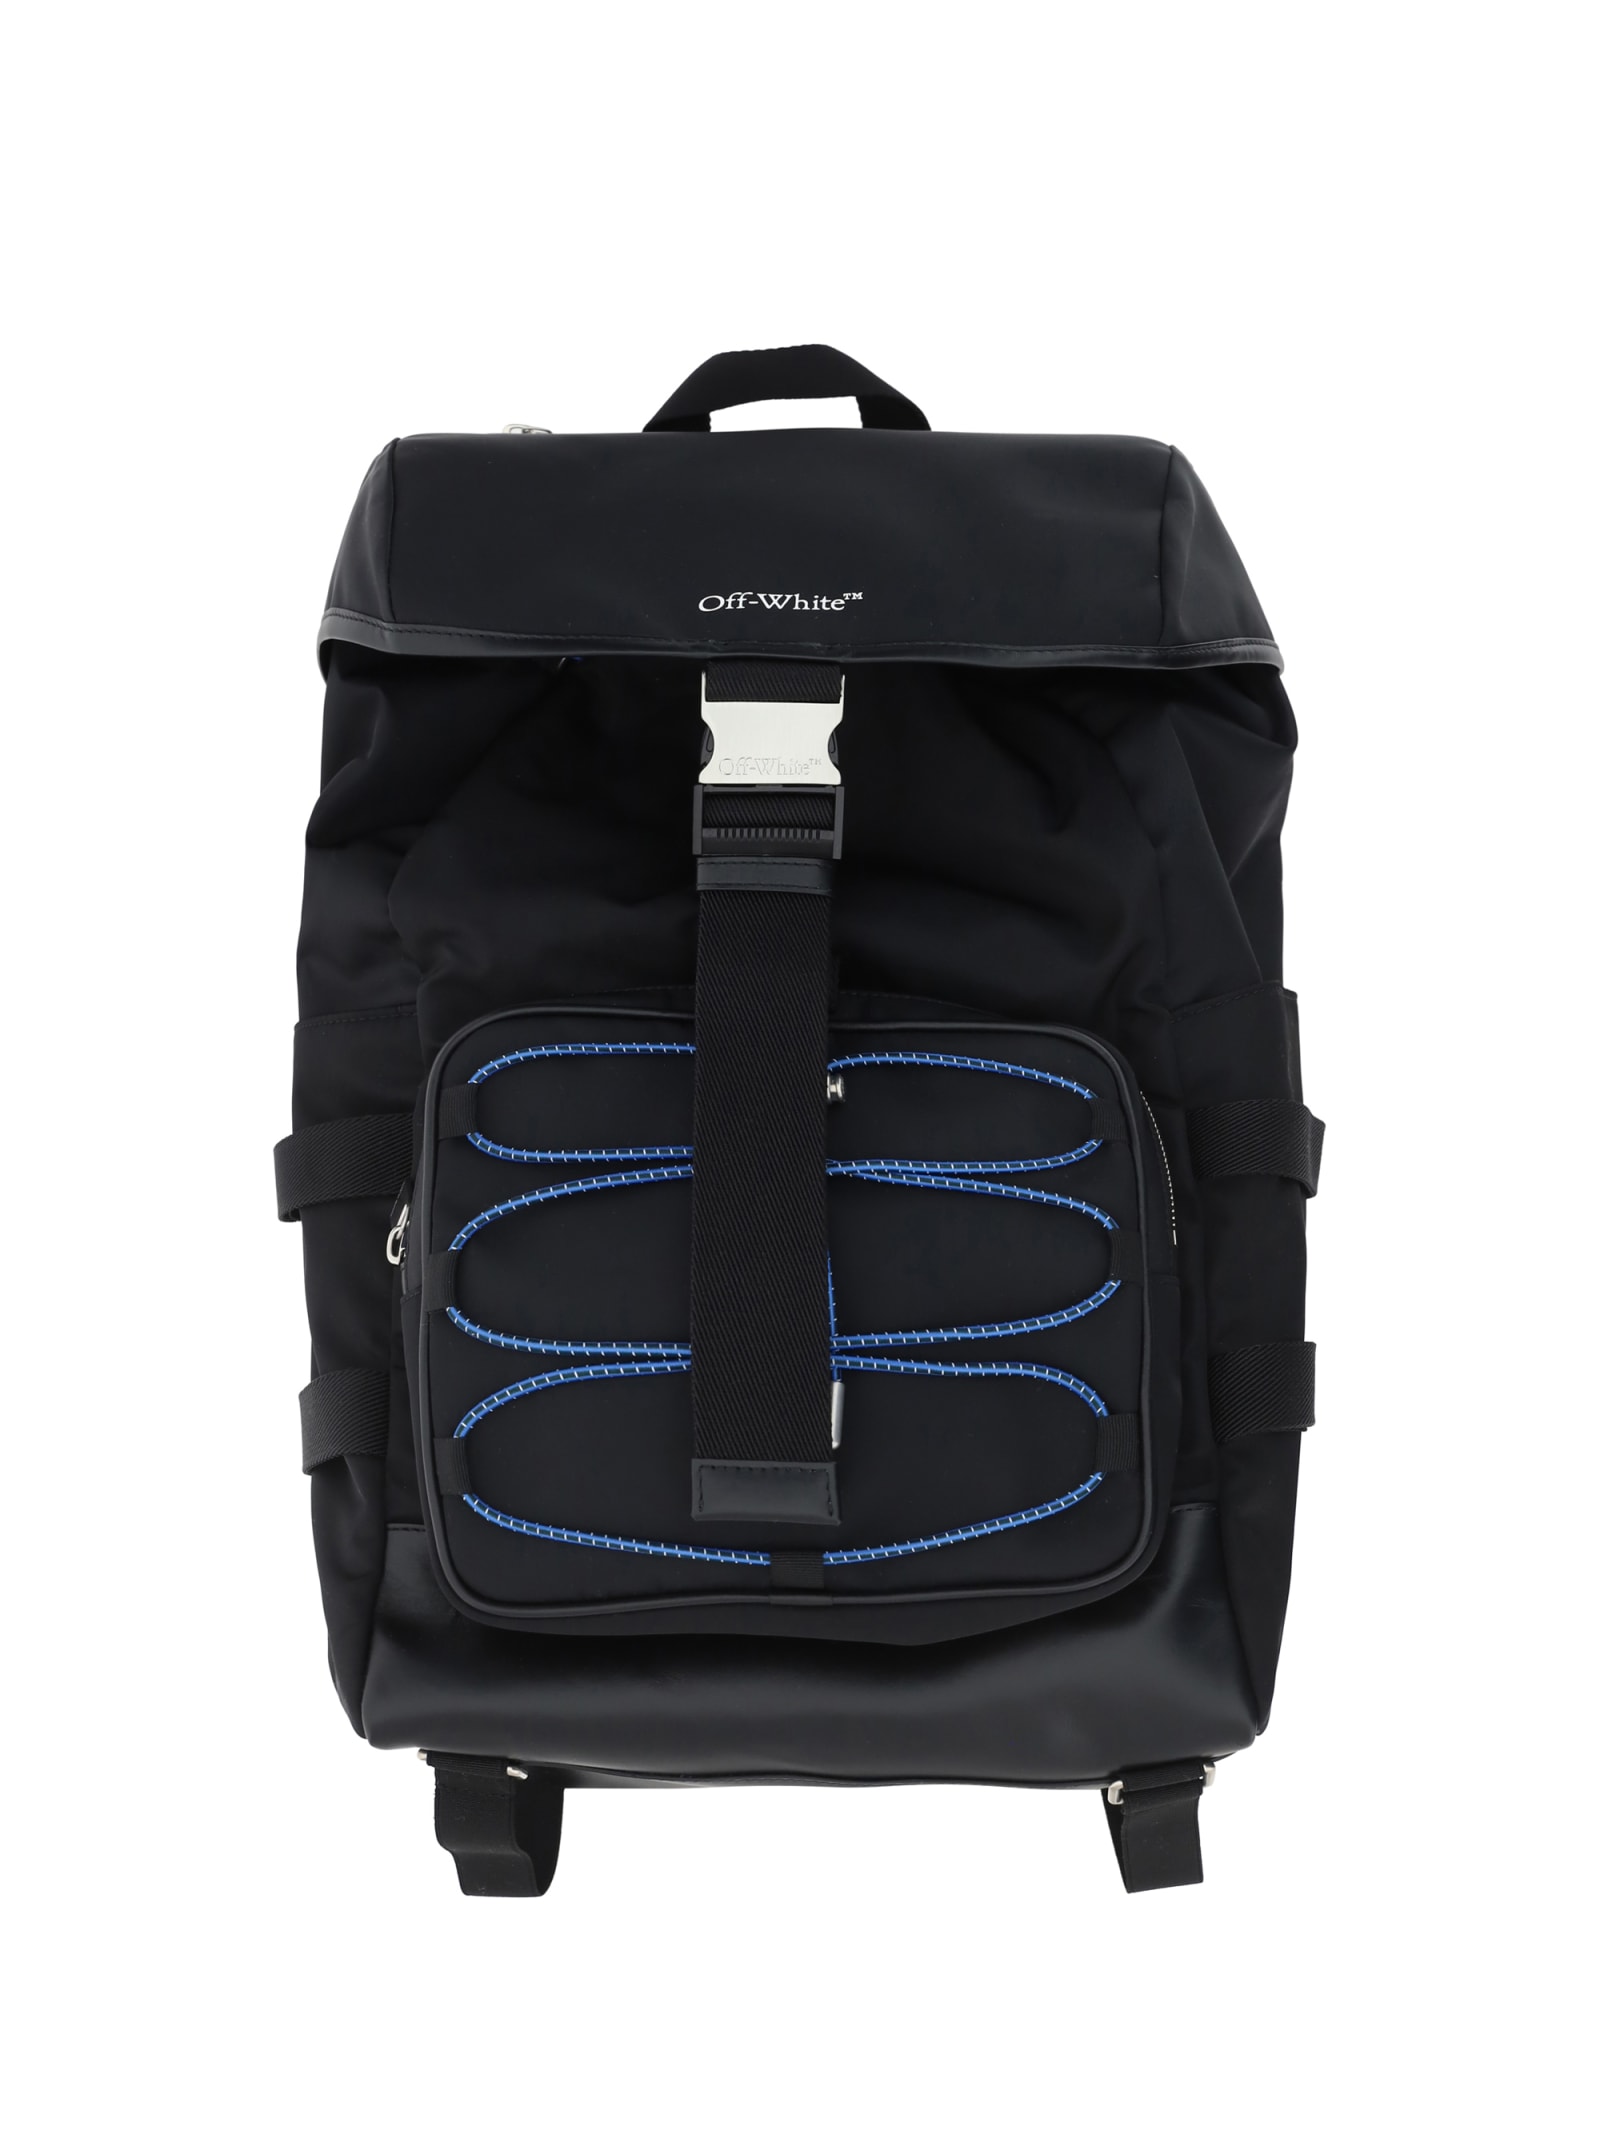 OFF-WHITE Black Courrie Backpack 'Black No Color